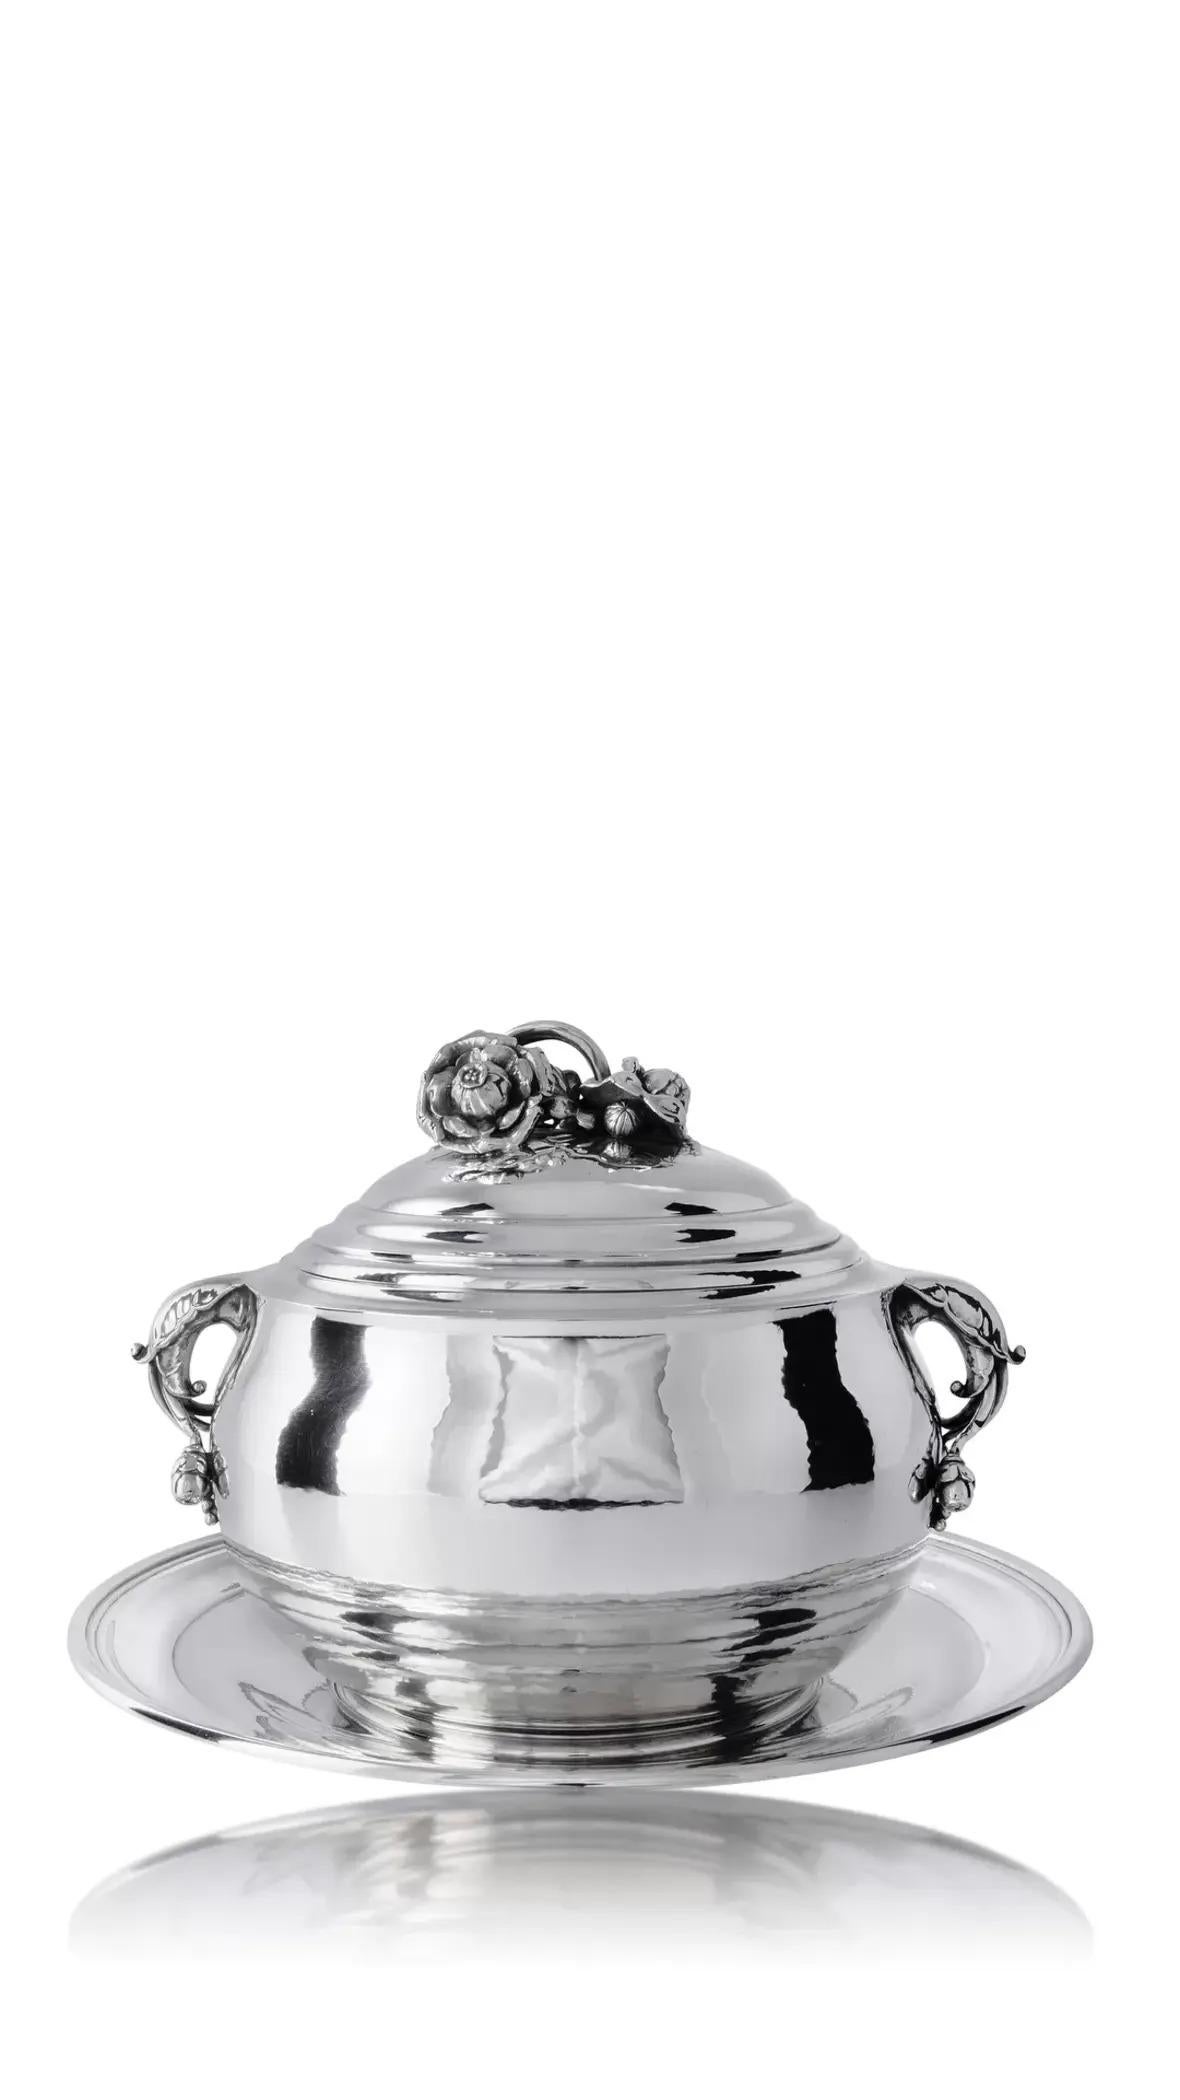 A rare vintage sterling silver Georg Jensen round tureen with amazing floral decorations and underplate, design #337C by Georg Jensen from circa 1920. A circular tureen with two leaf capped handles with berry joins, the domed cover with floral and